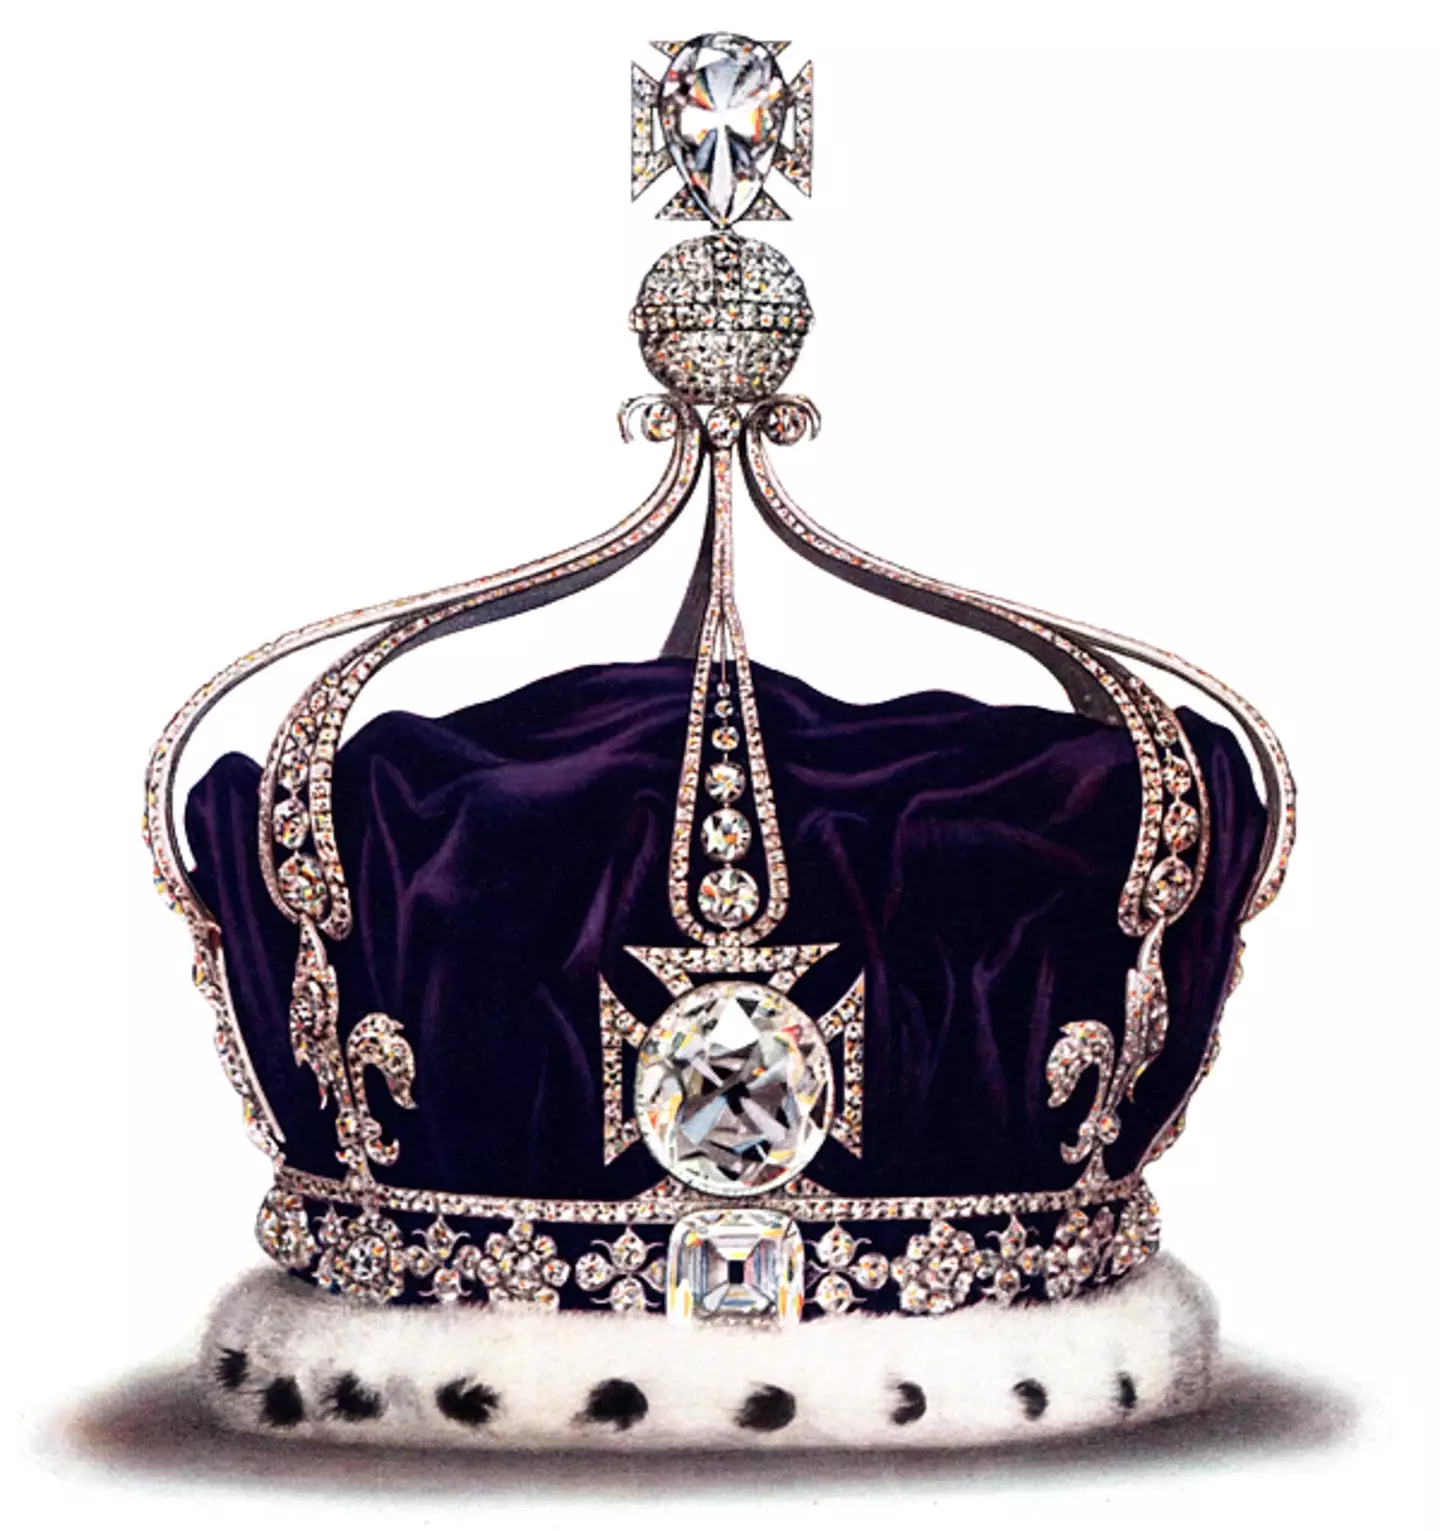 Camilla will today wear Queen Mary's Crown, but it will not feature the Koh-i-Noor diamond.